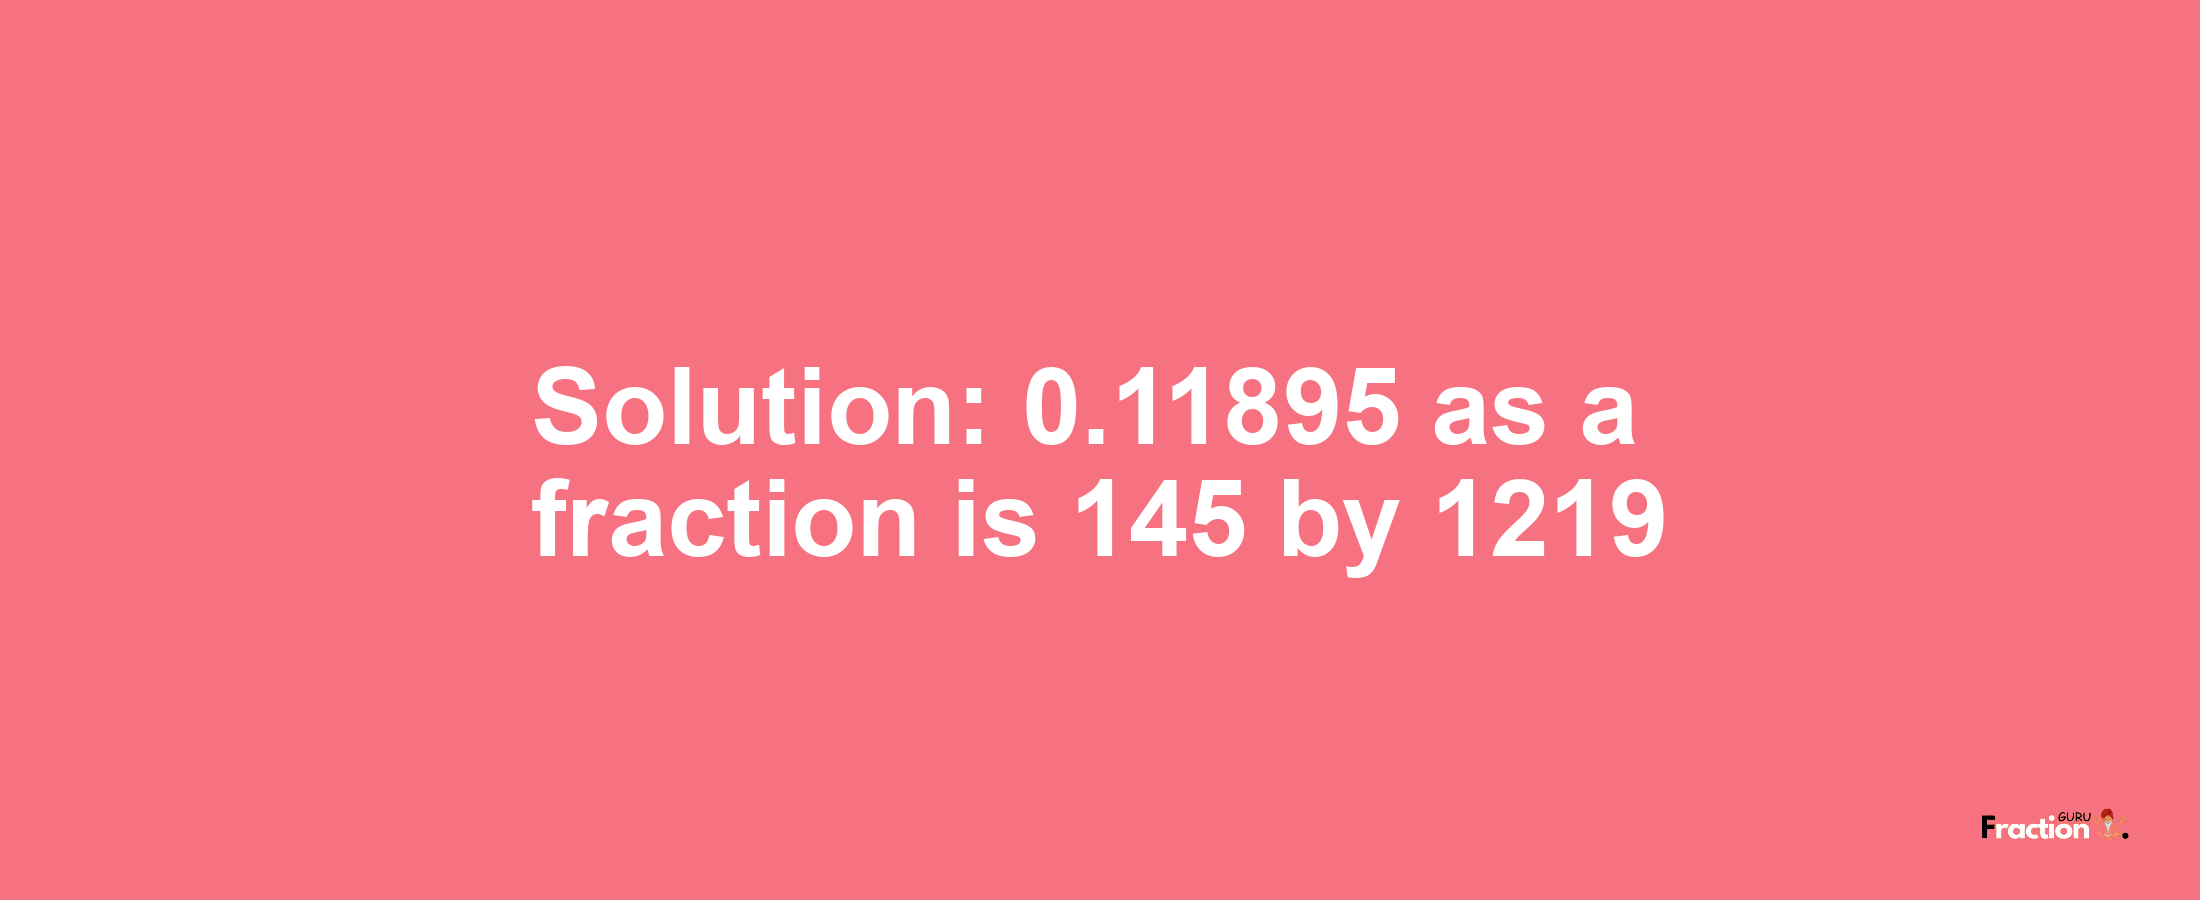 Solution:0.11895 as a fraction is 145/1219